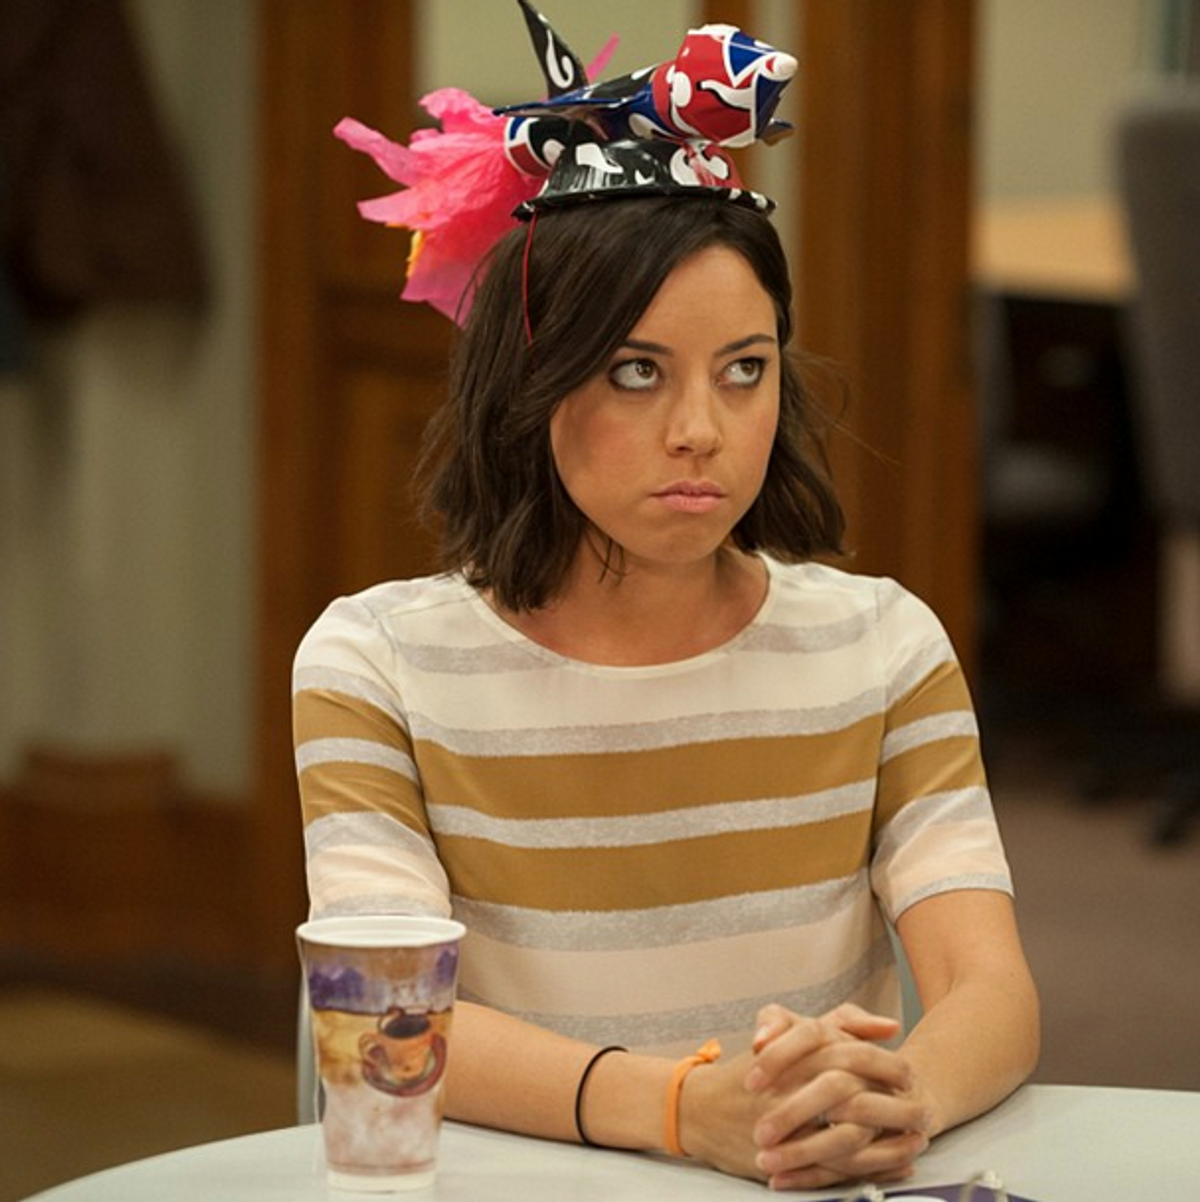 The Realities of Turning 21 As Told by April Ludgate from Parks and Rec